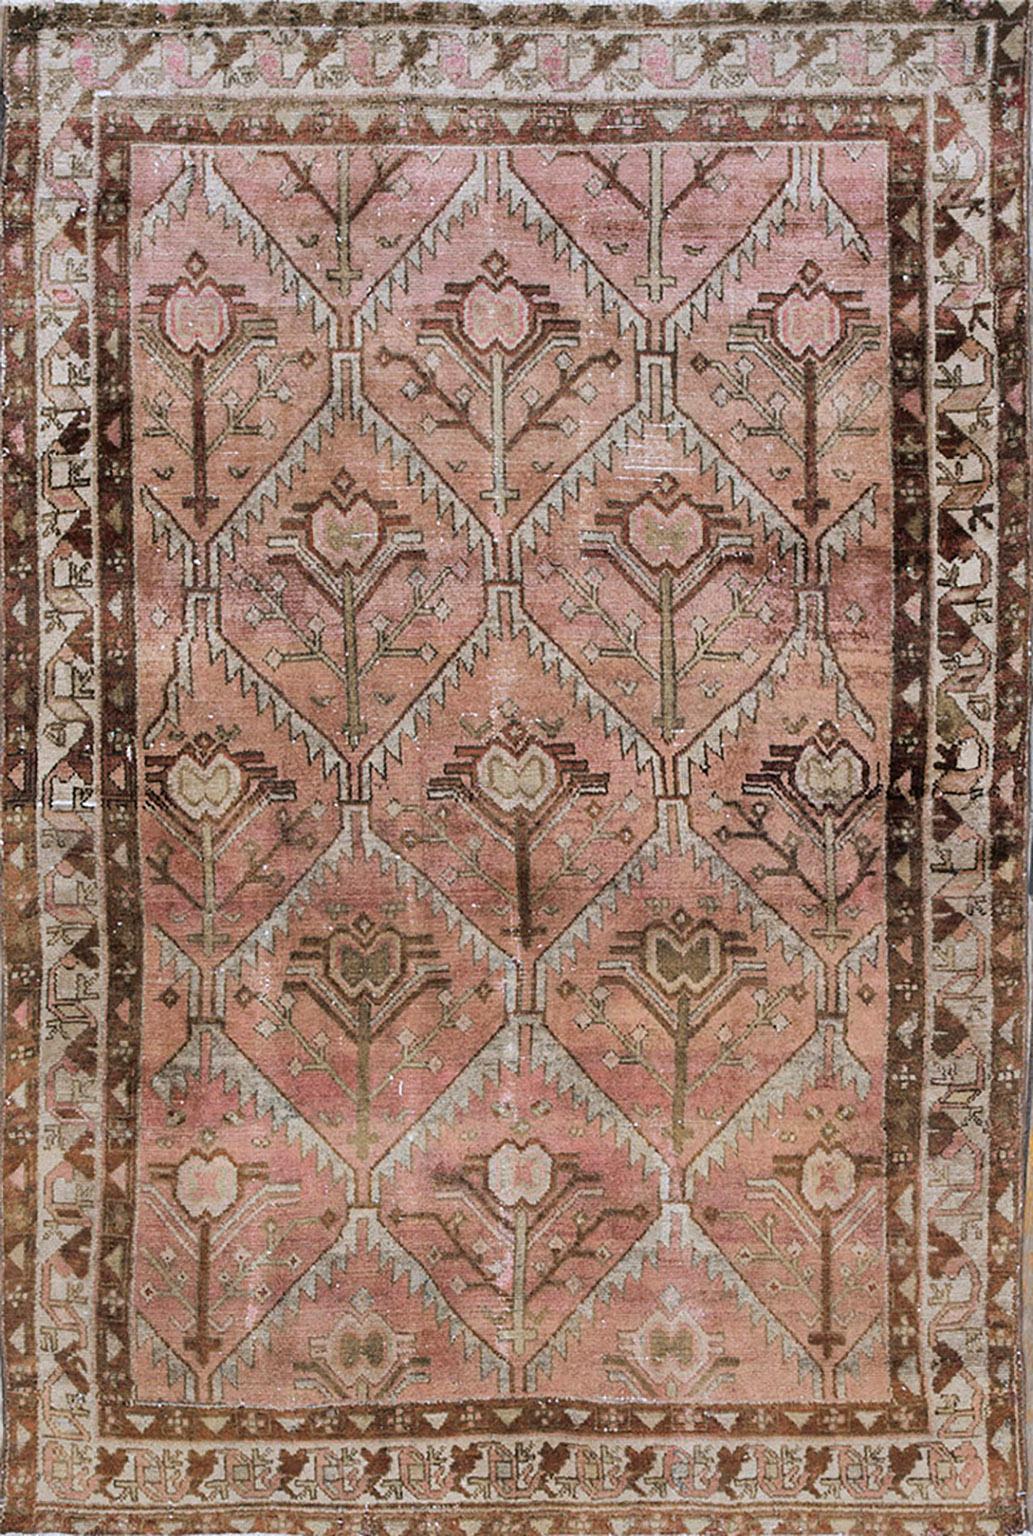 Early 20th Century Persian Malayer Carpet ( 4'4